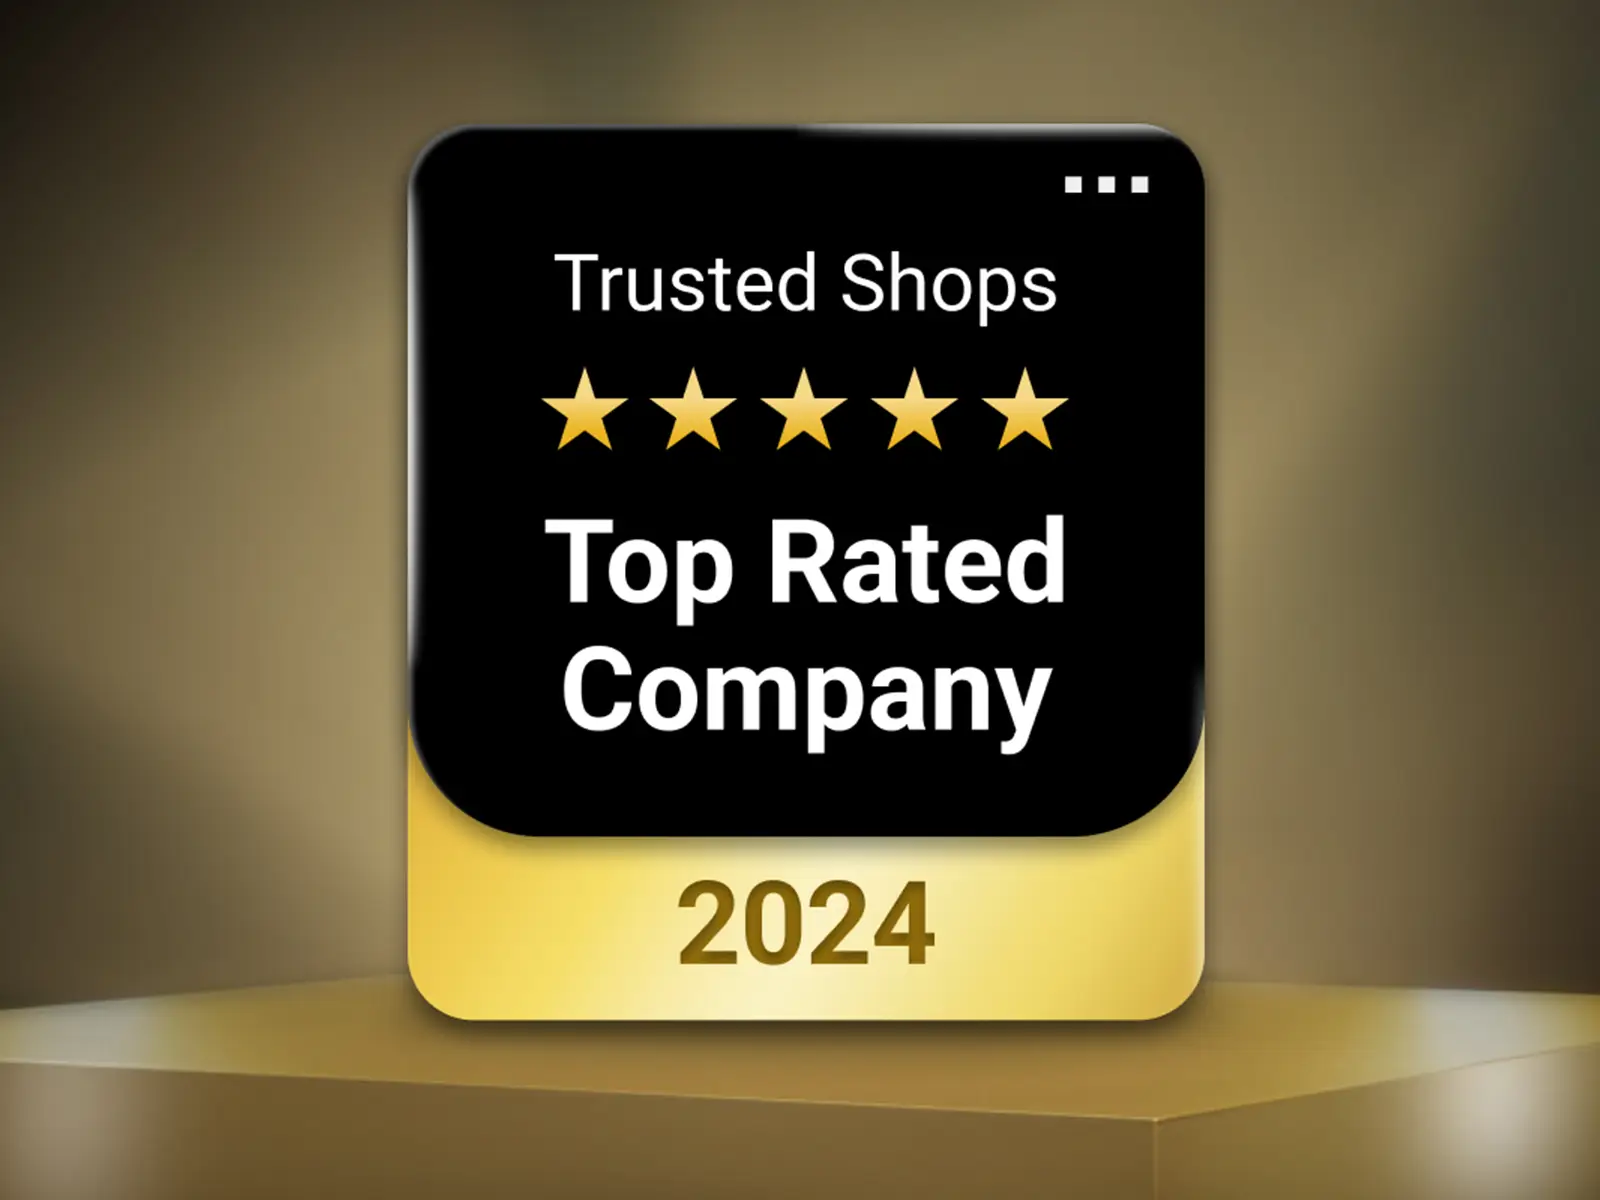 Award Trusted Shops Top Rated Company 2024